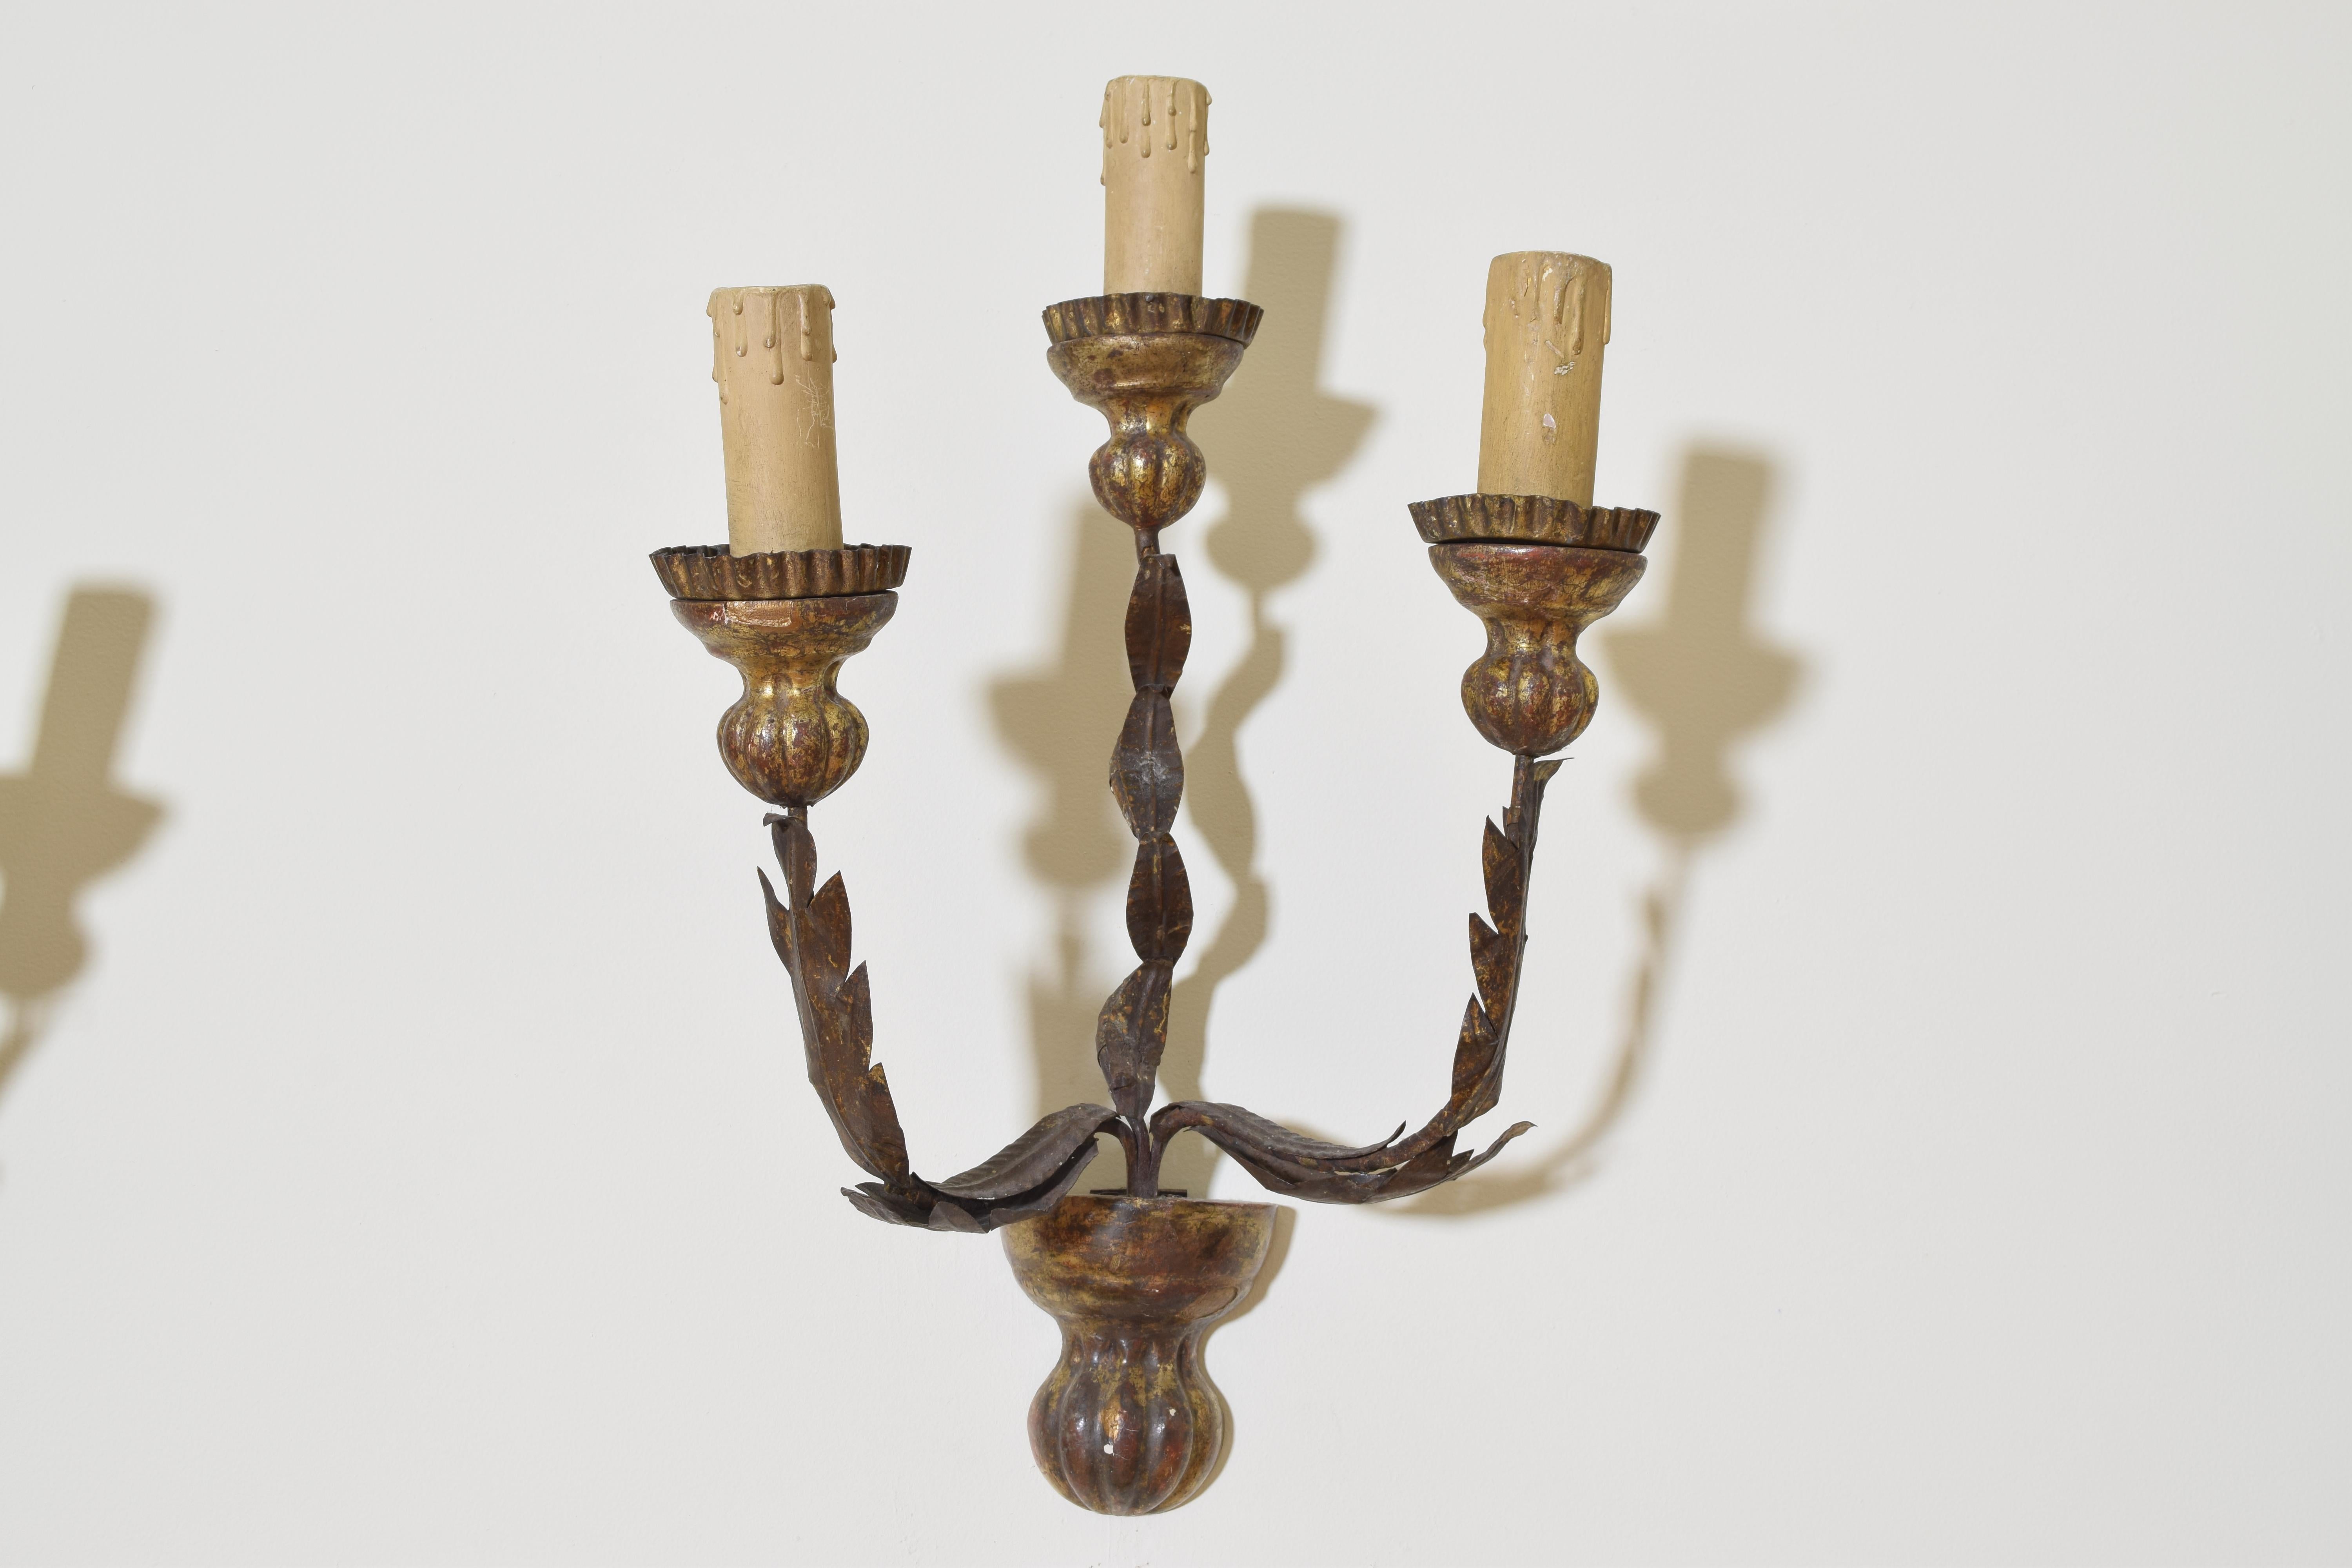 Early 19th Century Group of 4 Italian Giltwood, Iron, and Metal 3-Arm Wall Sconces